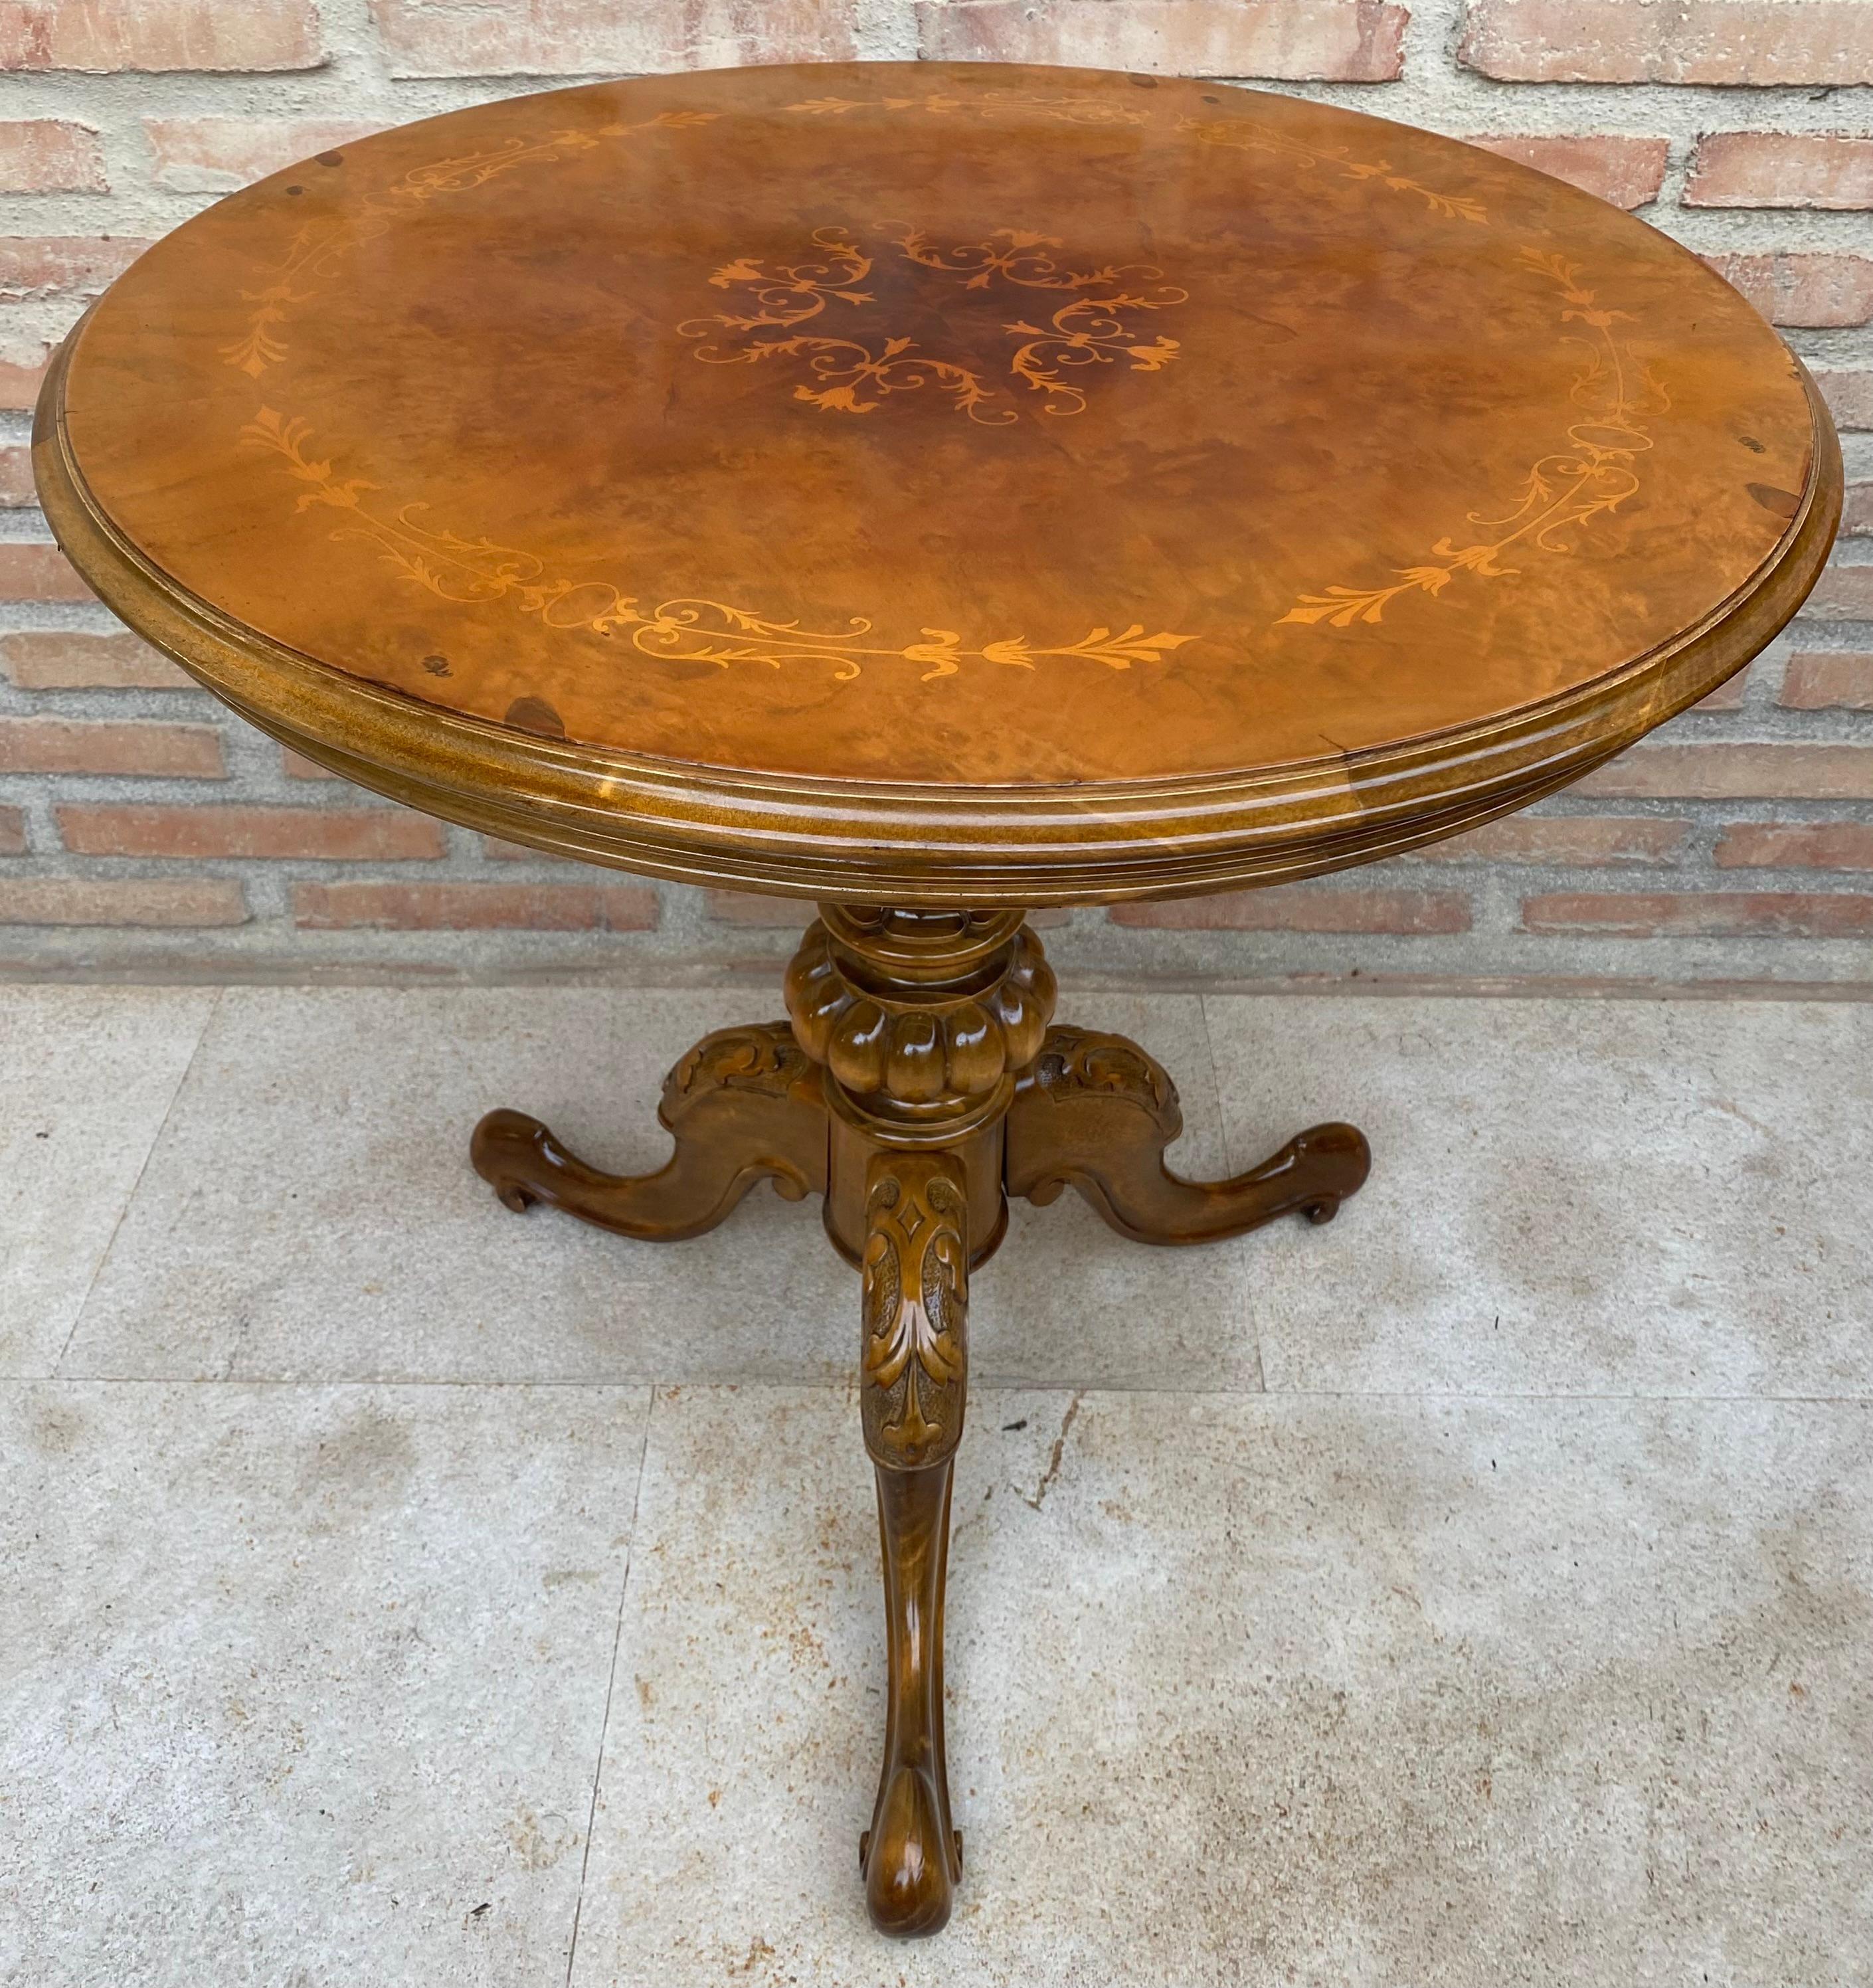 The English tea table is an original piece of furniture made at the end of the 19th century. This round shaped tea table has a marquetry top supported by a carved pedestal with three feet.